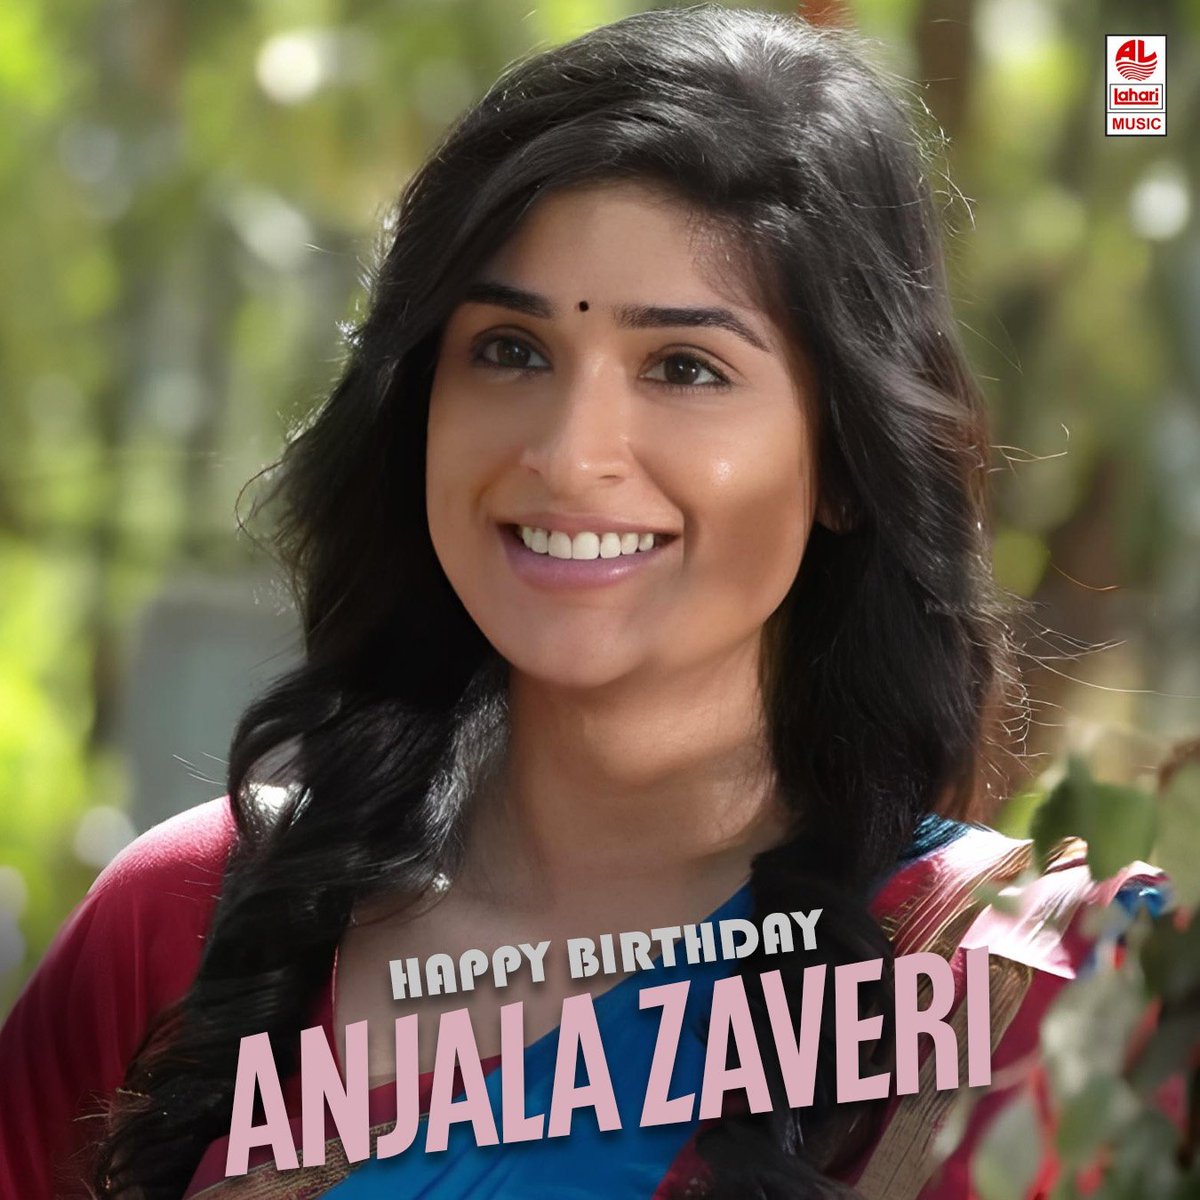 To the incredibly talented Anjala Zaveri, a very happy birthday! Your charm and charisma light up the screen with every performance. 🎉🎬

#HappyBirthdayAnjalaZaveri